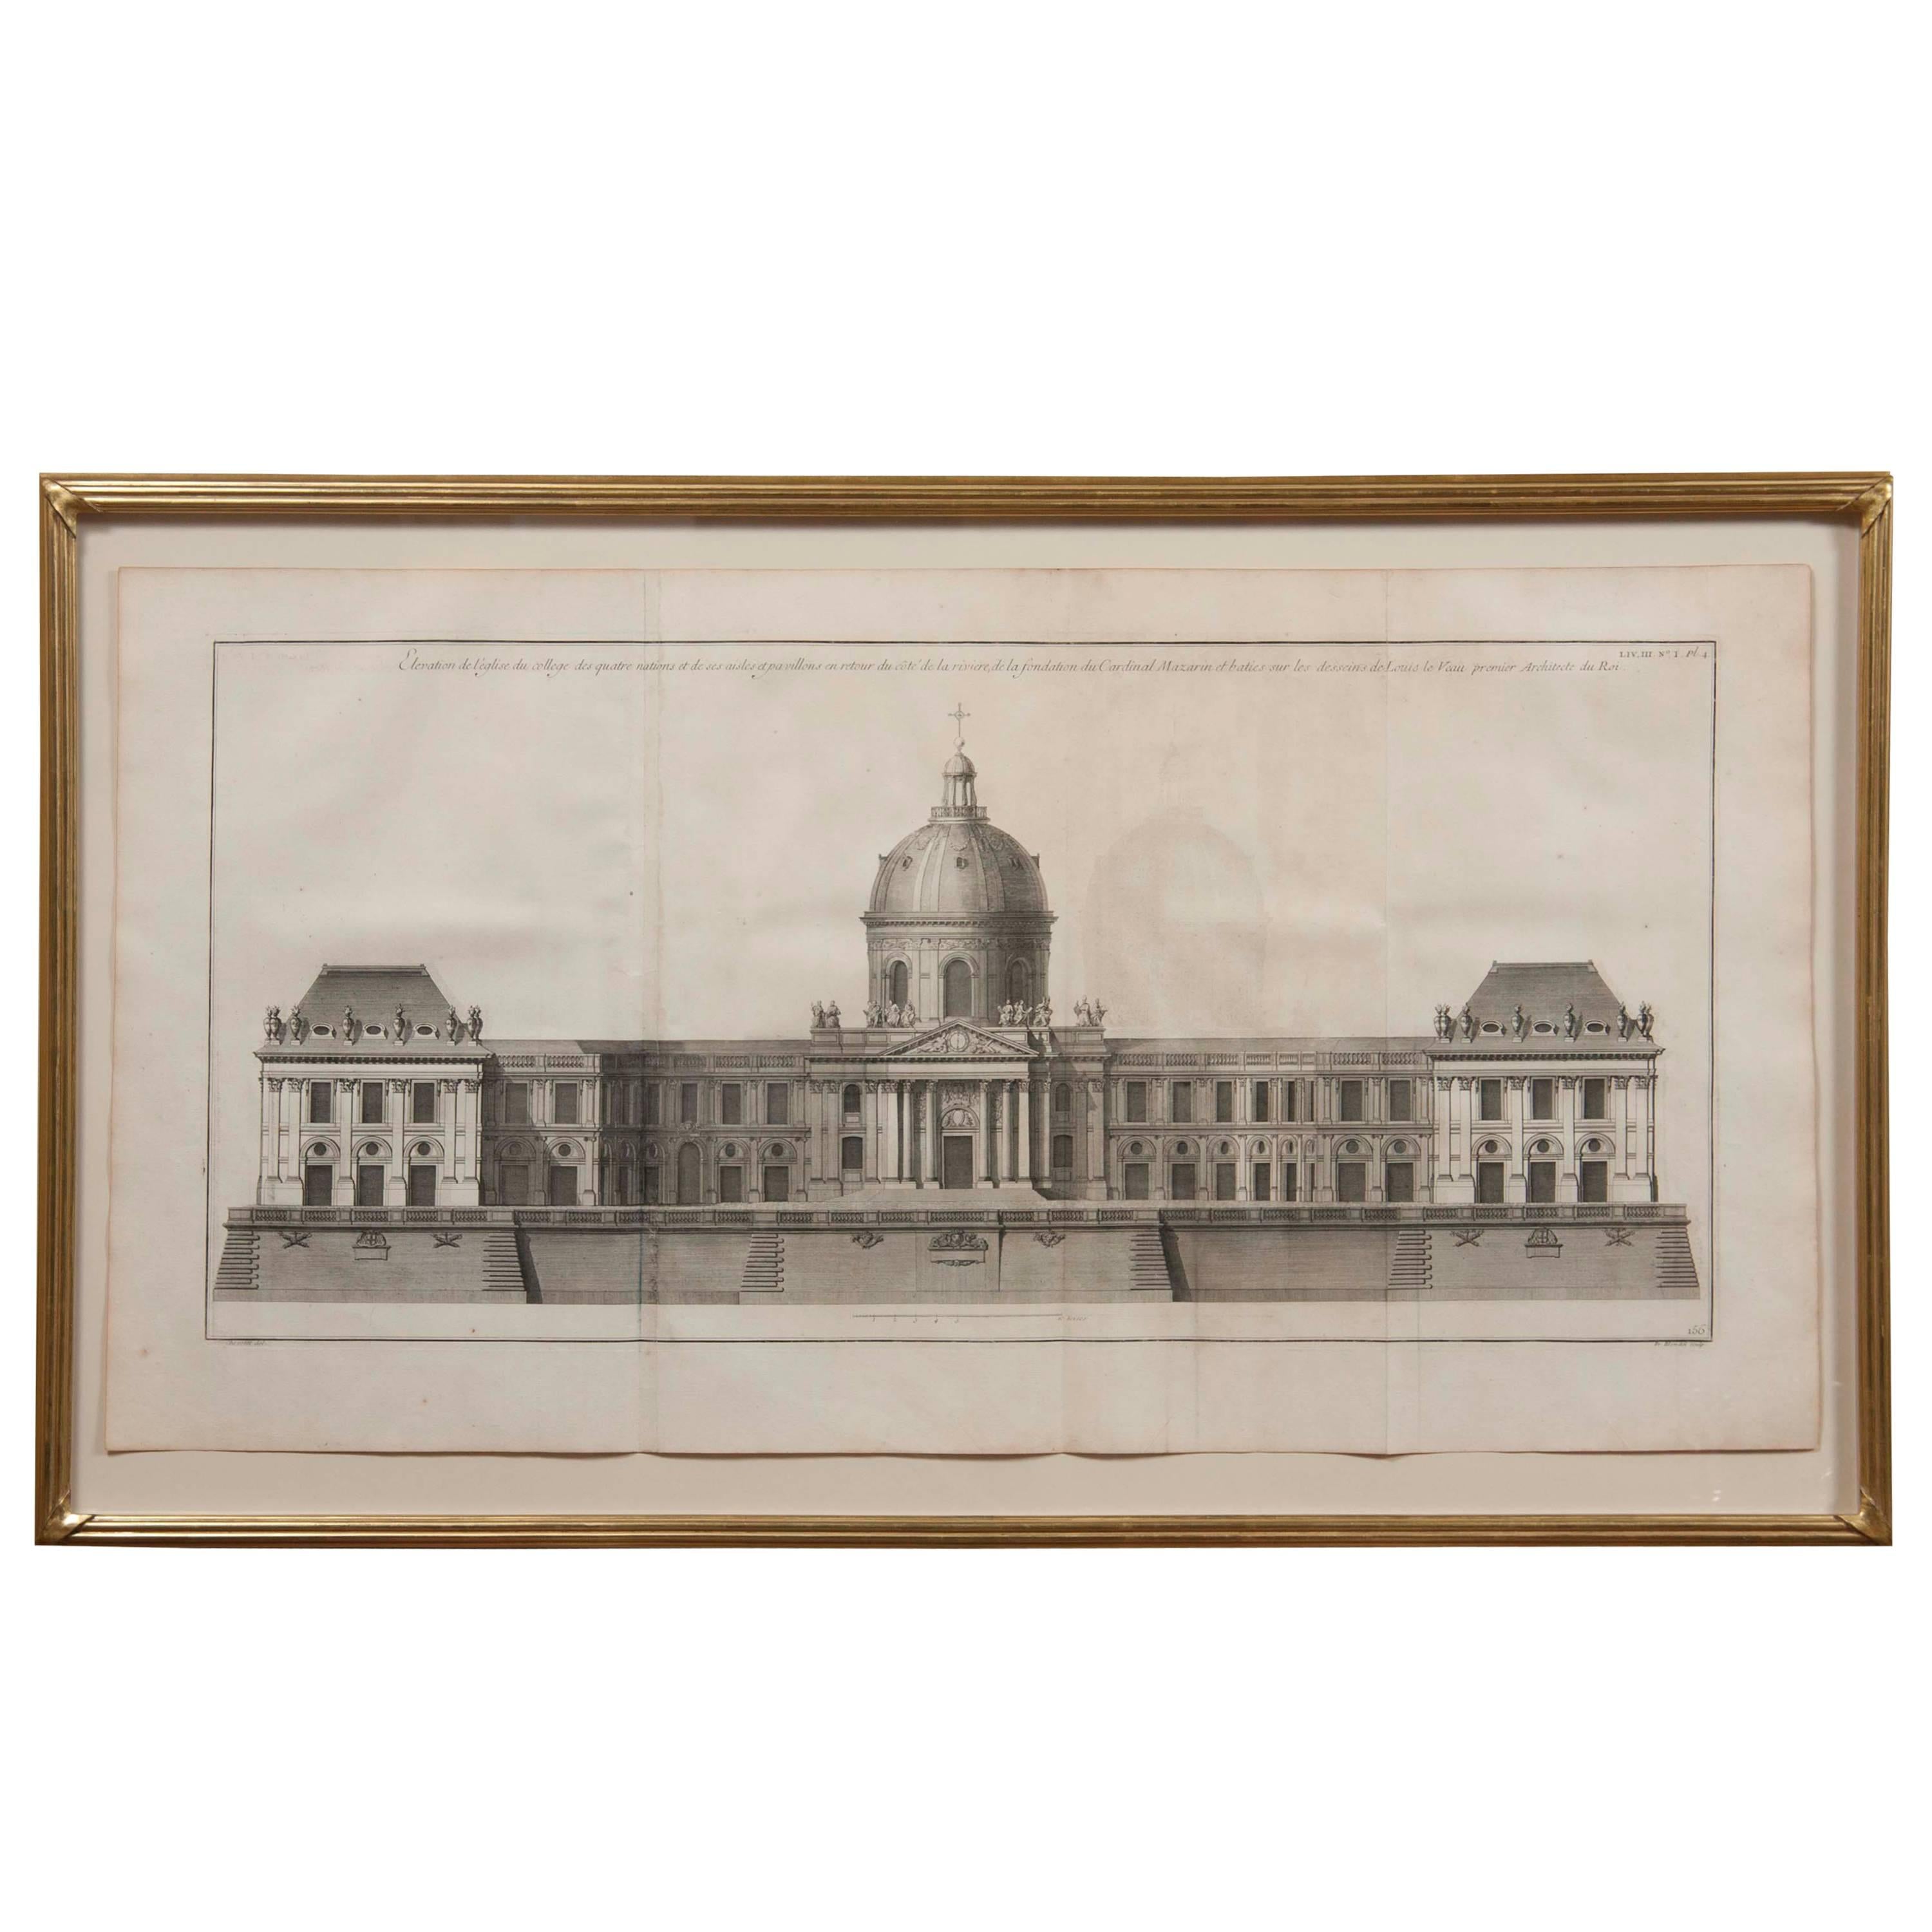 French Engraving "Institute de France" For Sale